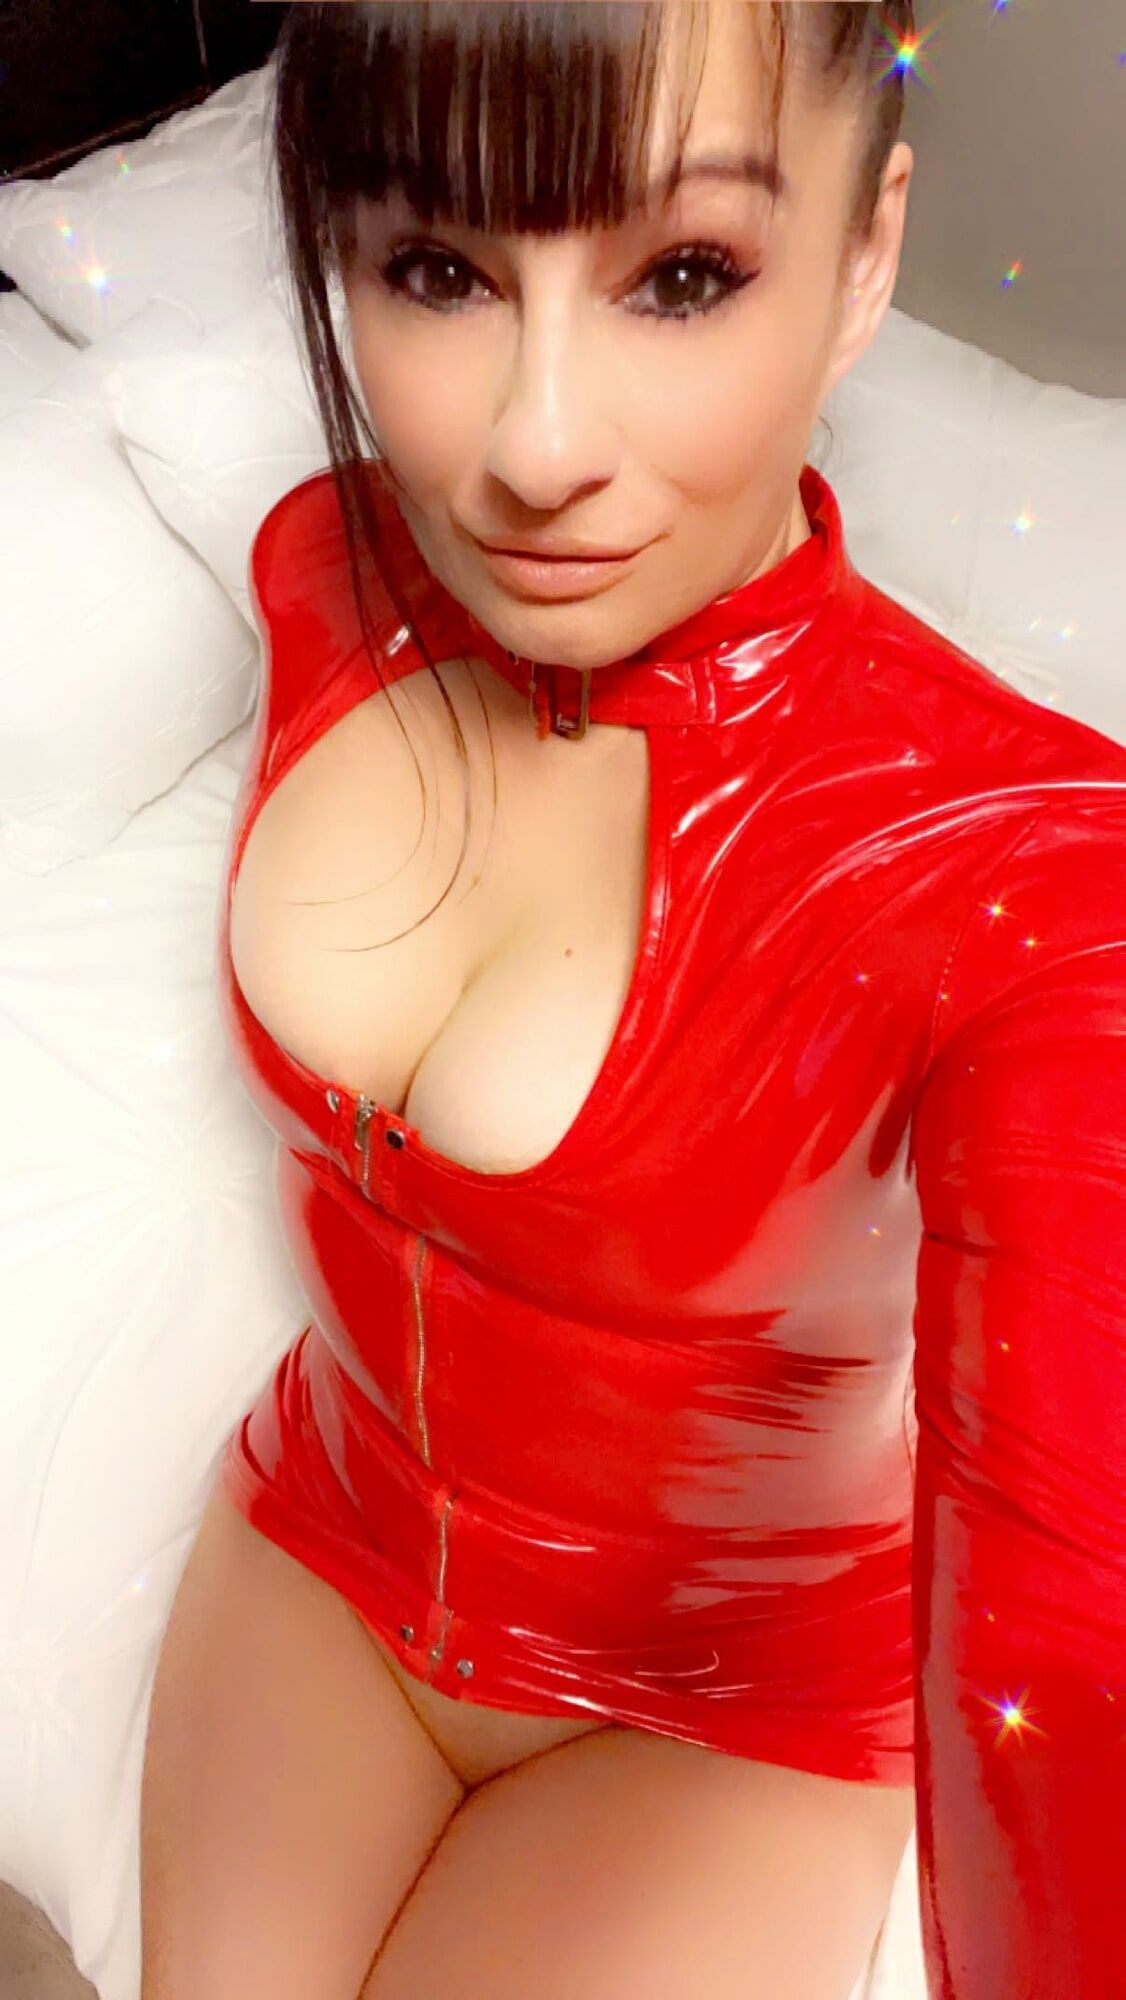 Red is sexy and naughty ❤️